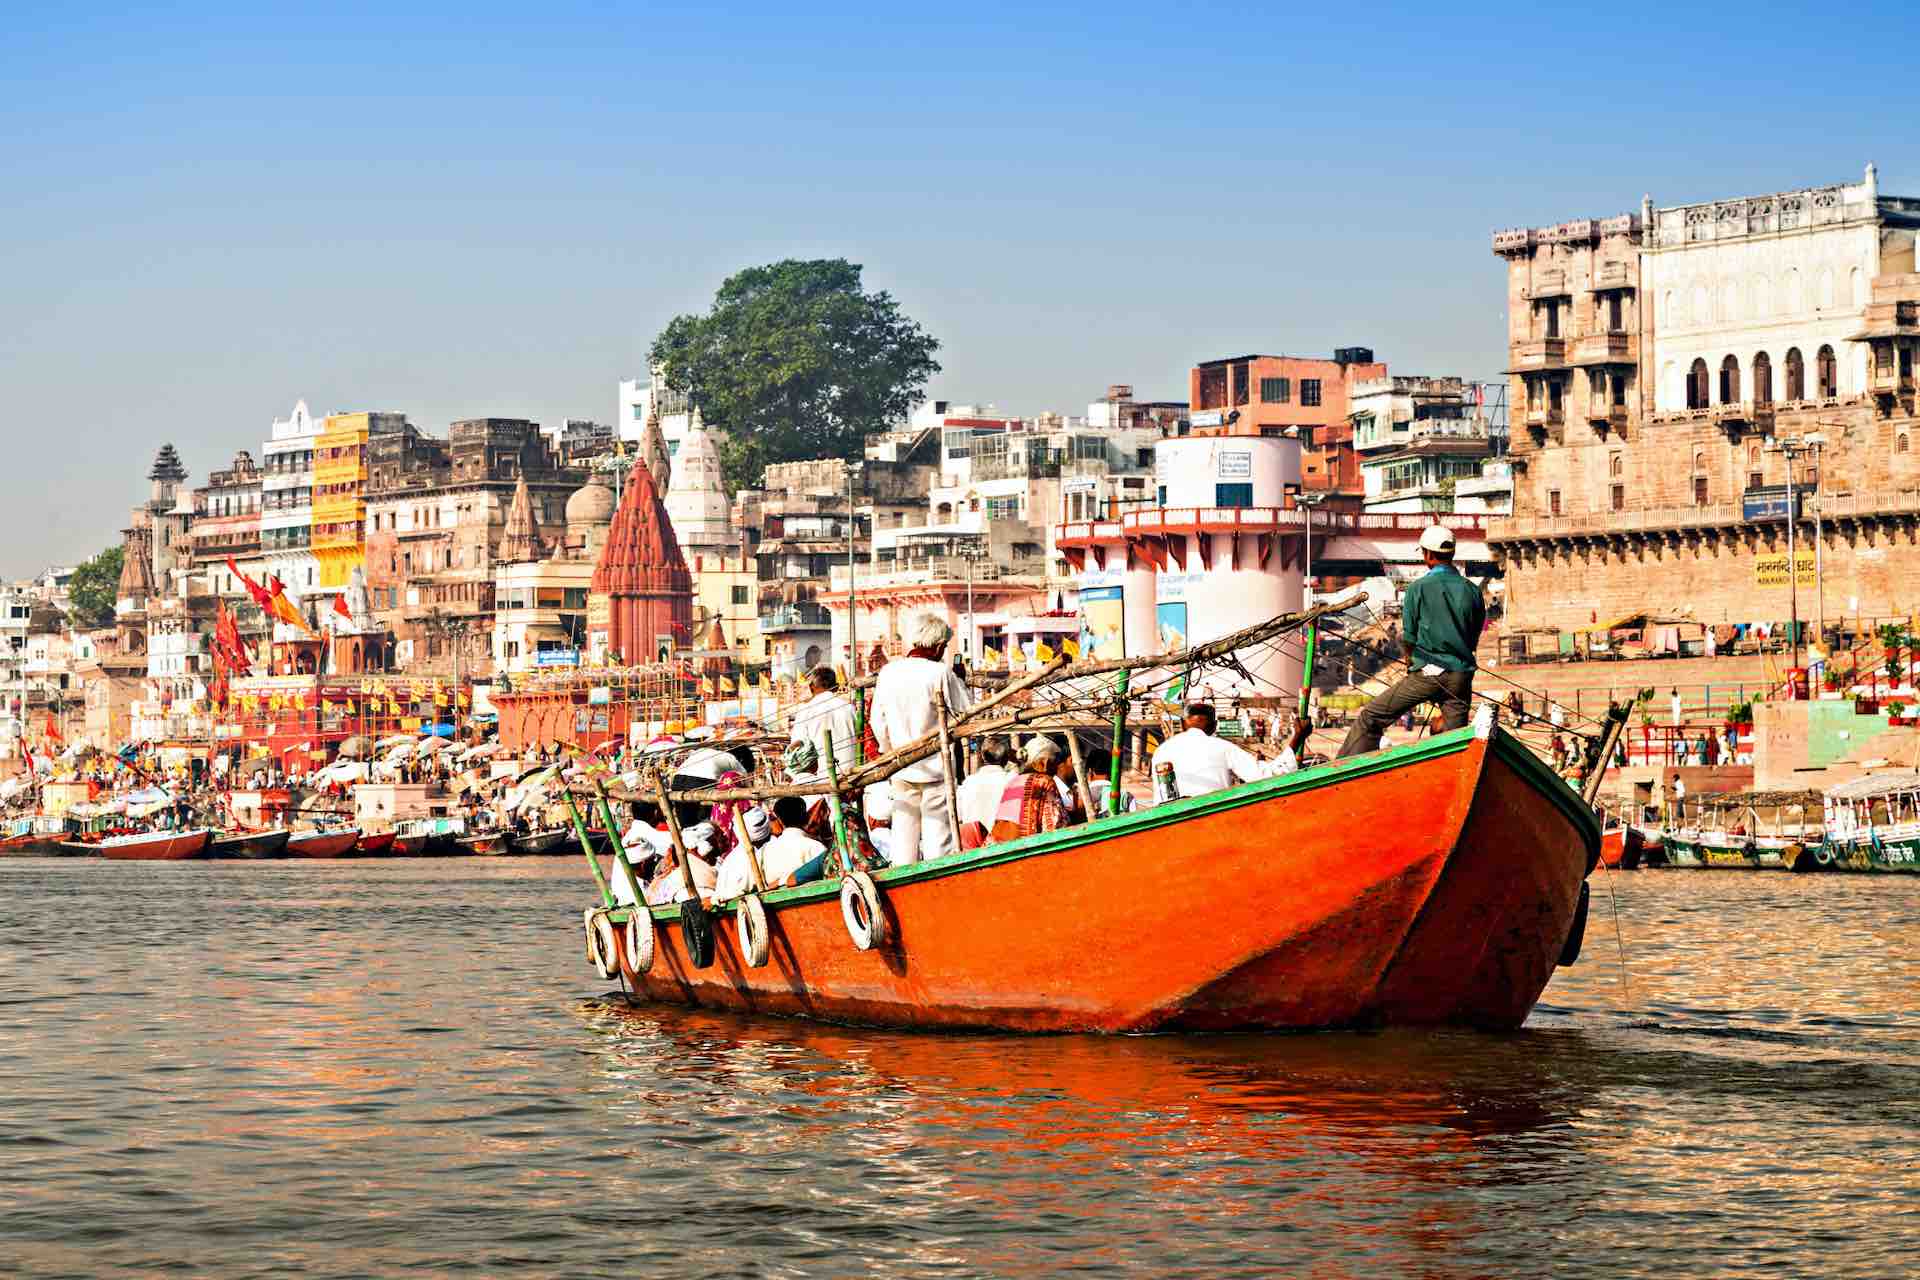 Varanasi nominated as first-ever SCO tourism and cultural capital